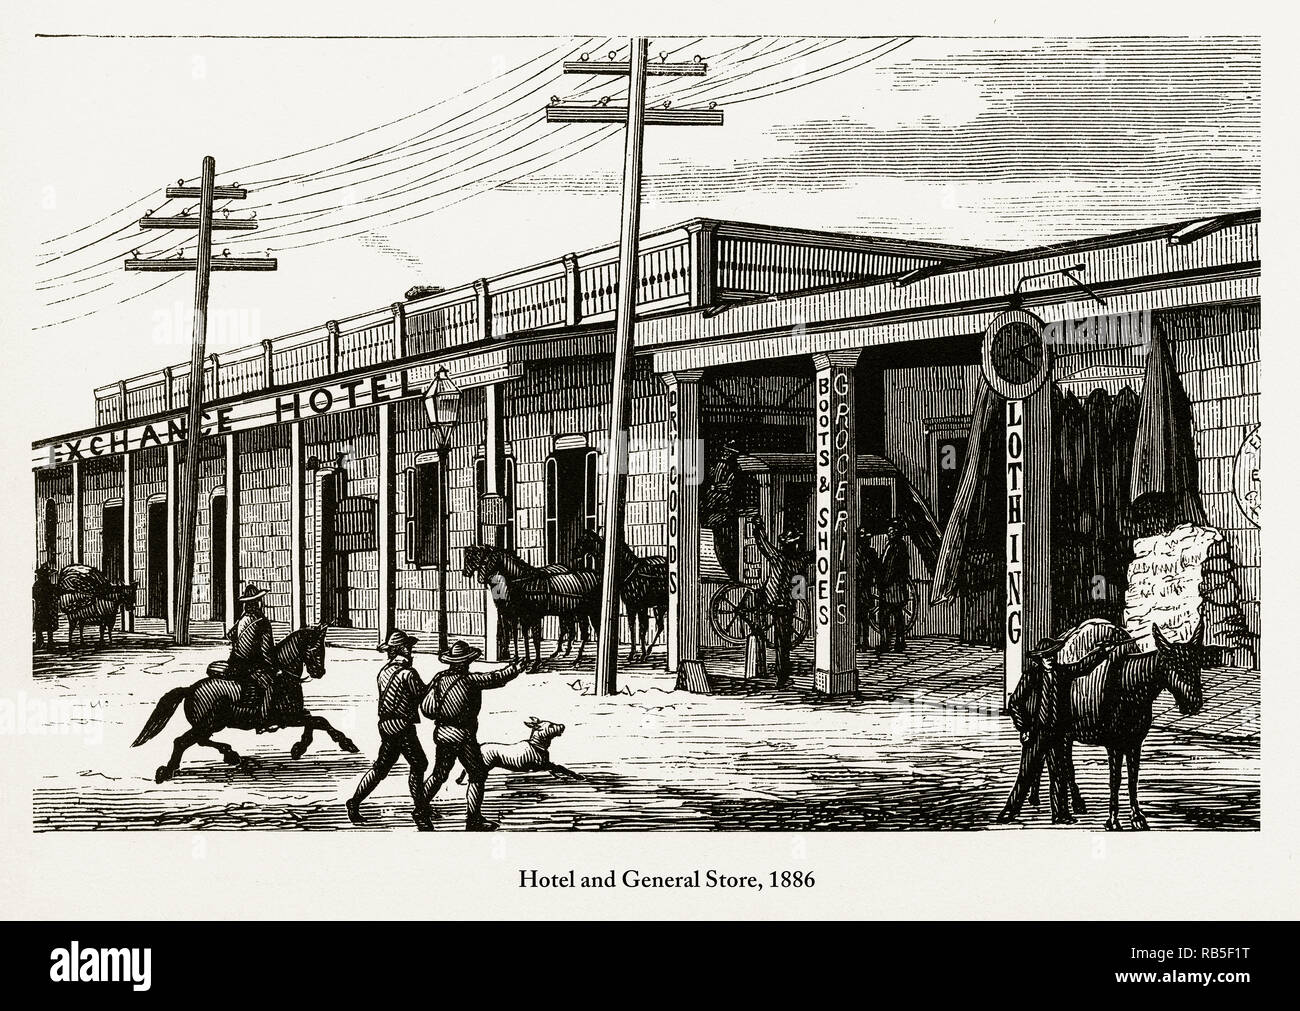 Hotel and General Store, Early American Engraving, 1886 Stock Photo